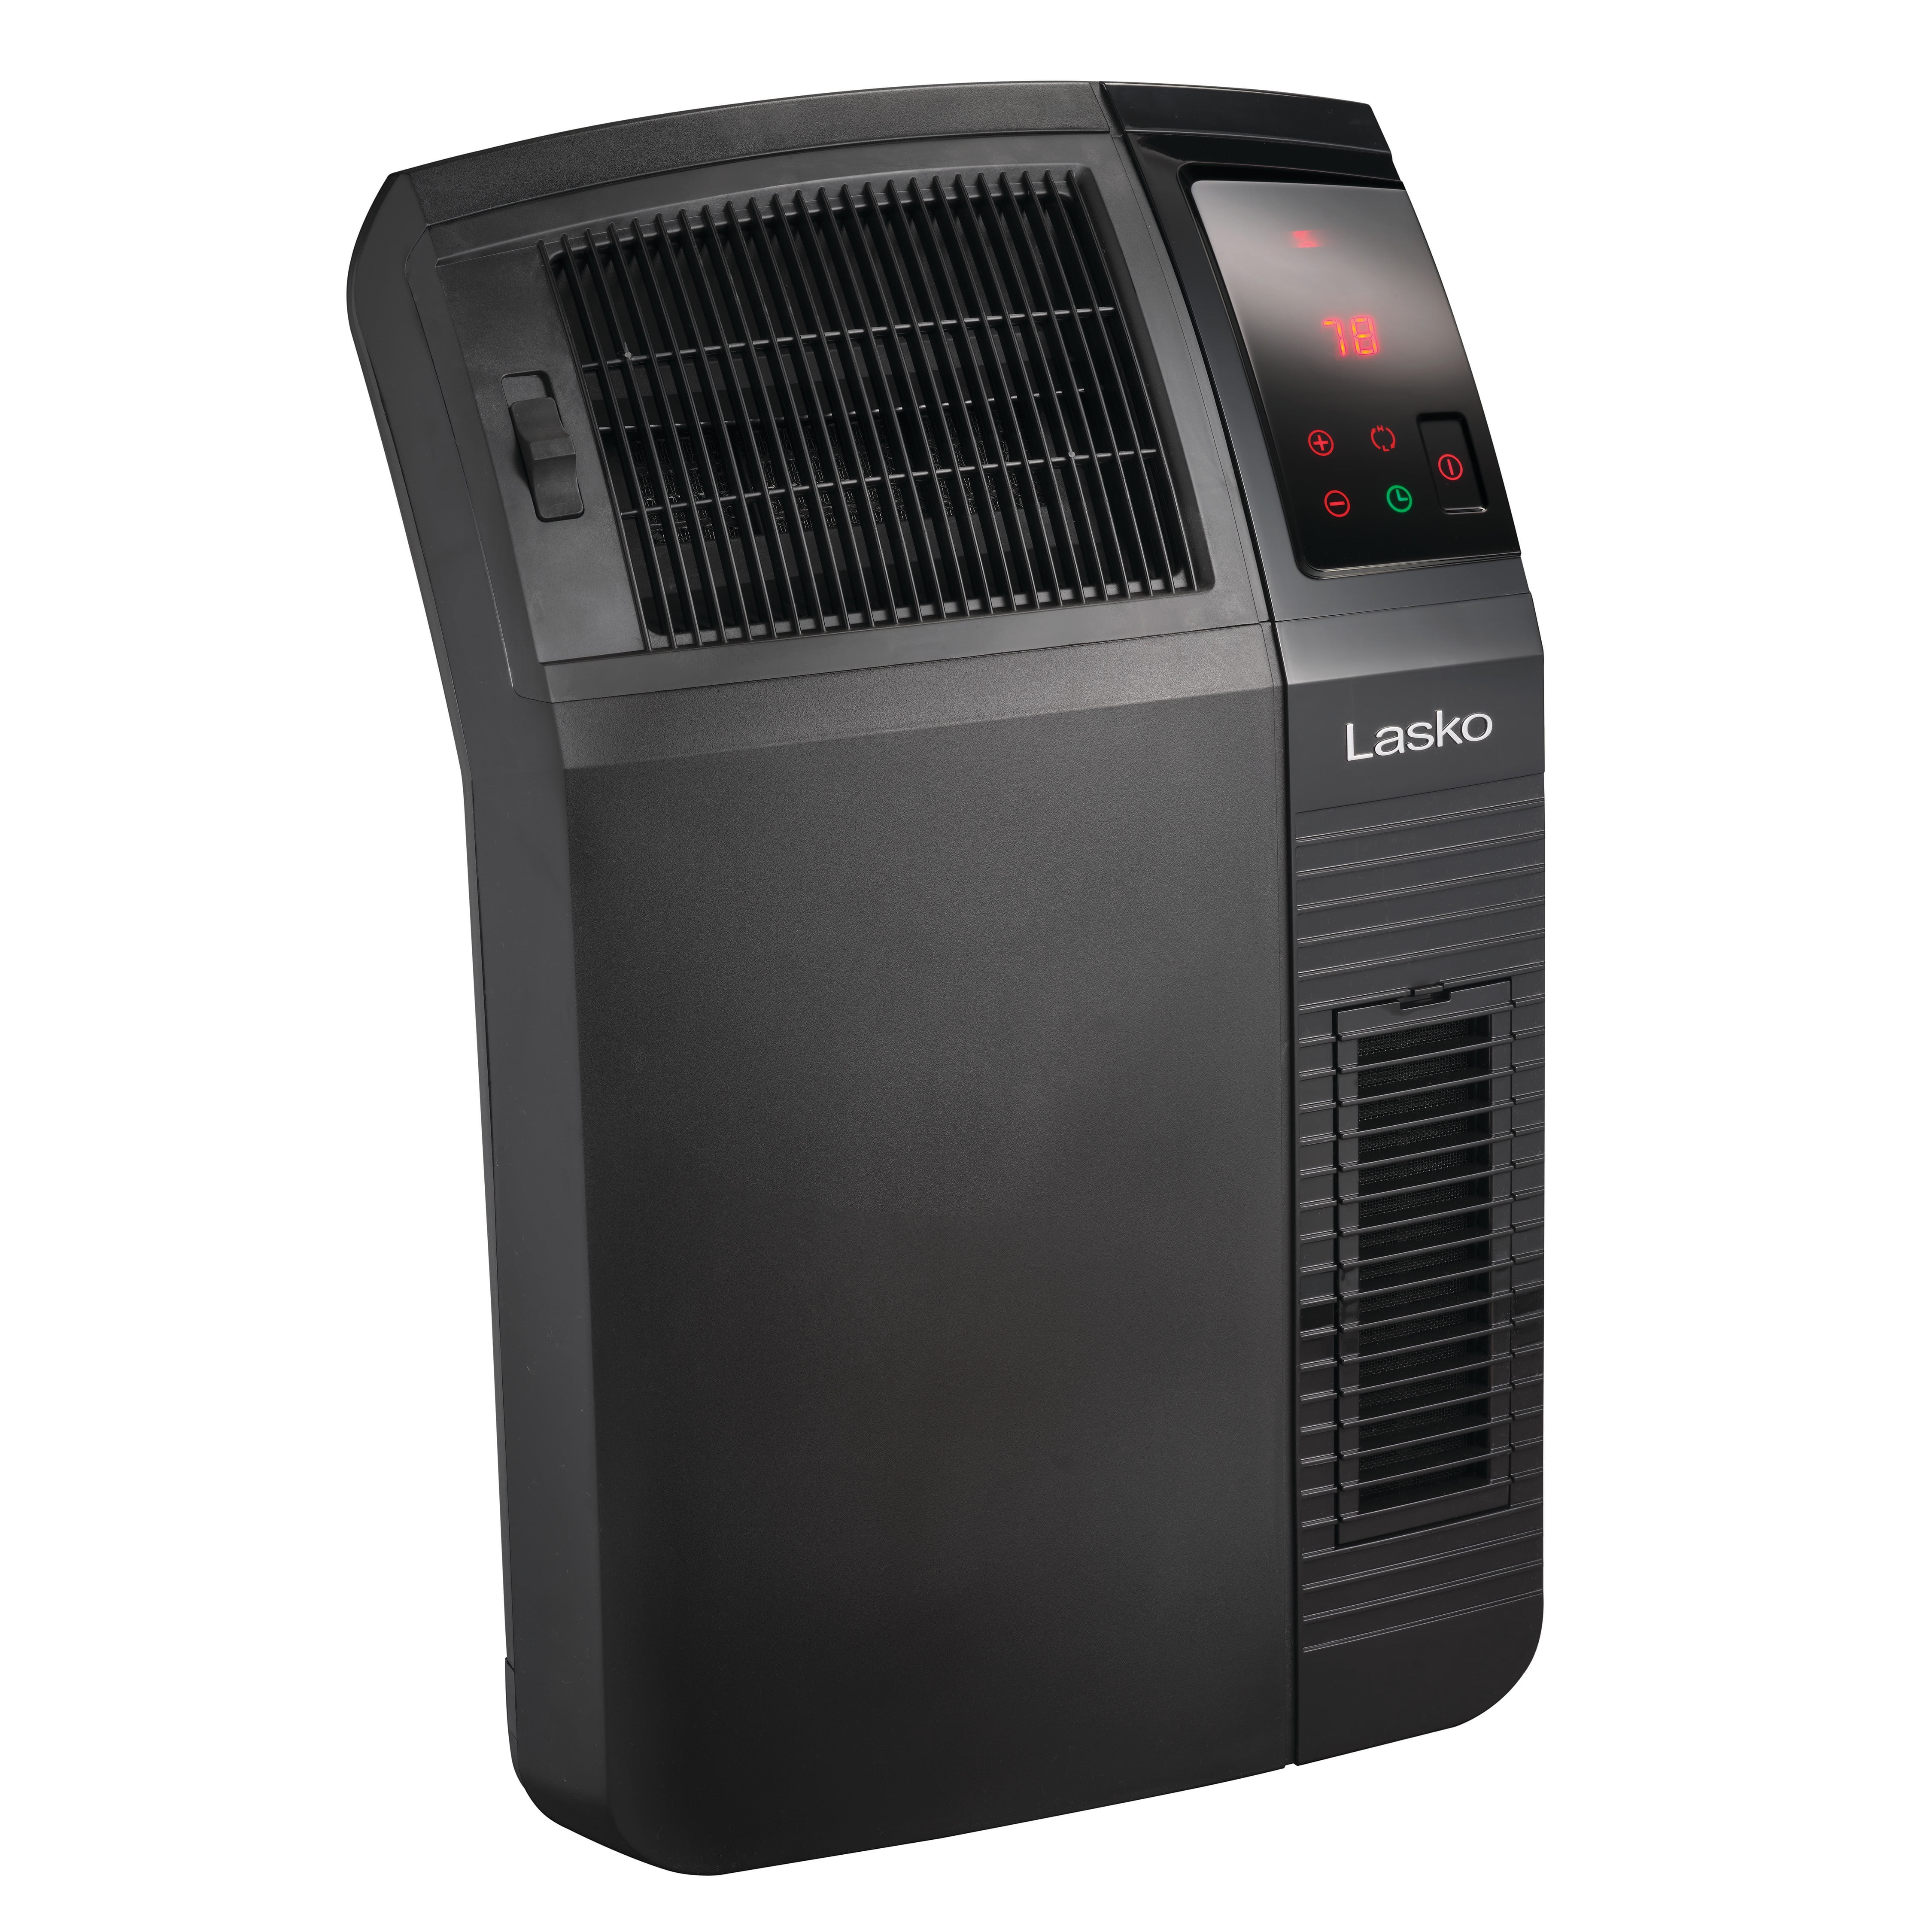 Lasko 1500W Electric Cyclonic Ceramic Room Space Heater with Timer, CC24920, Black